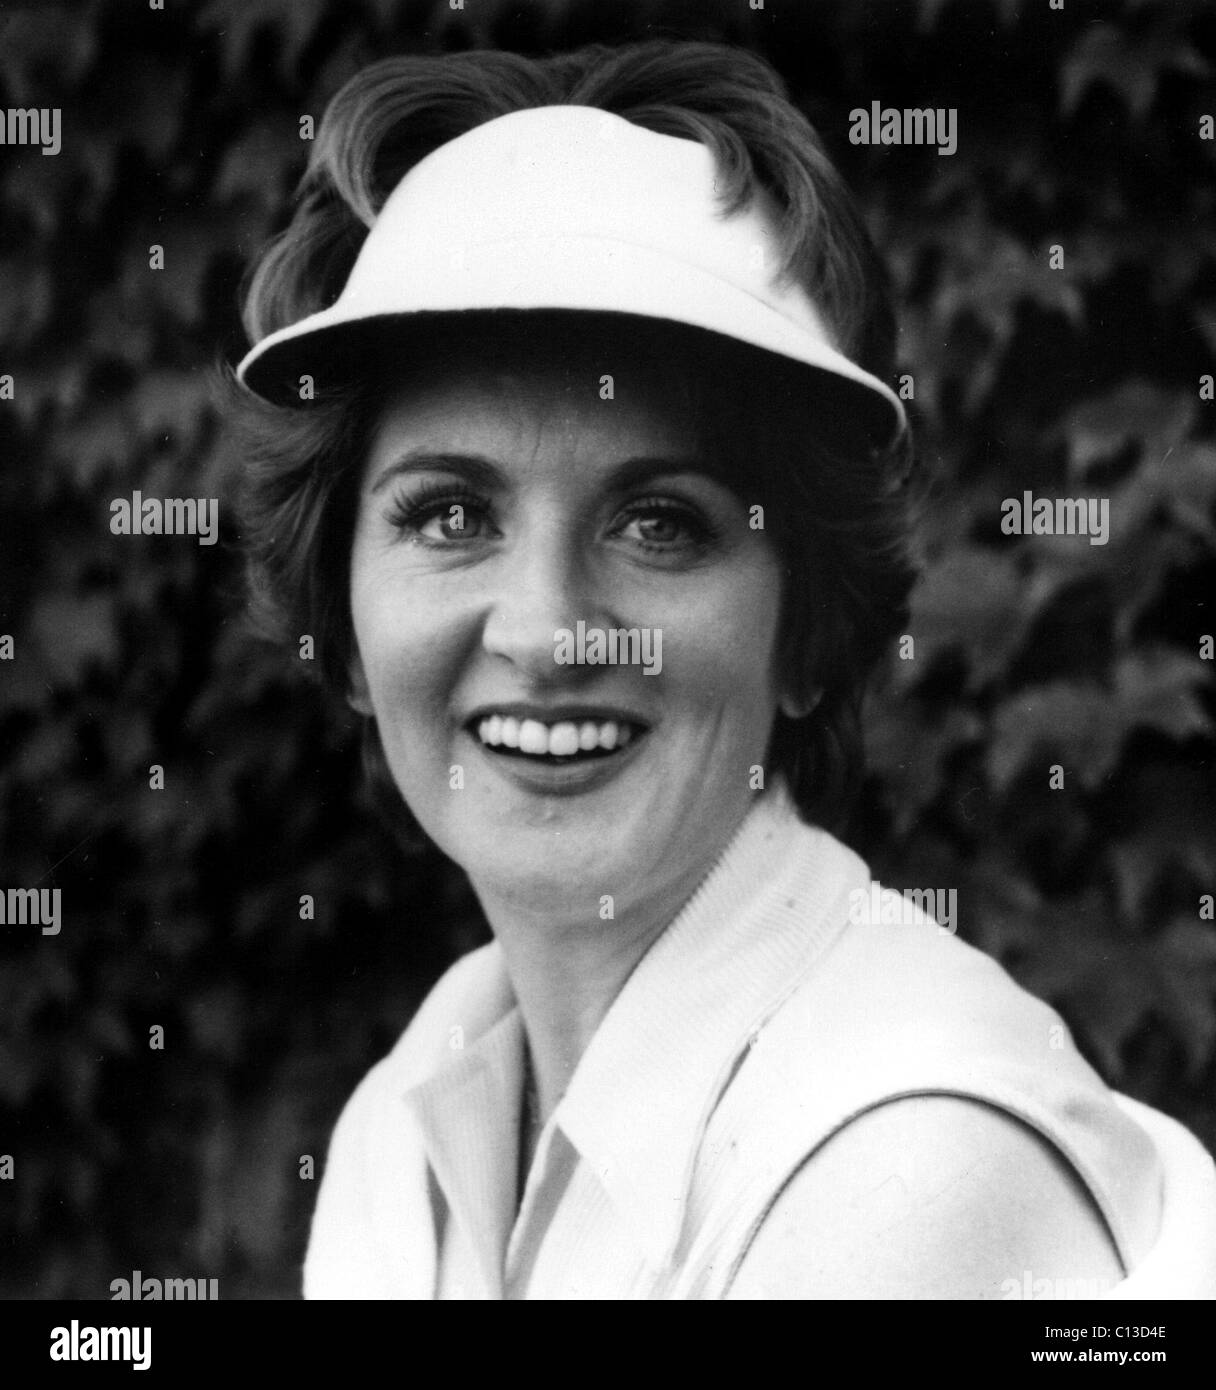 Fannie Flagg, publicity photo for STAY HUNGRY, 1976 Stock Photo